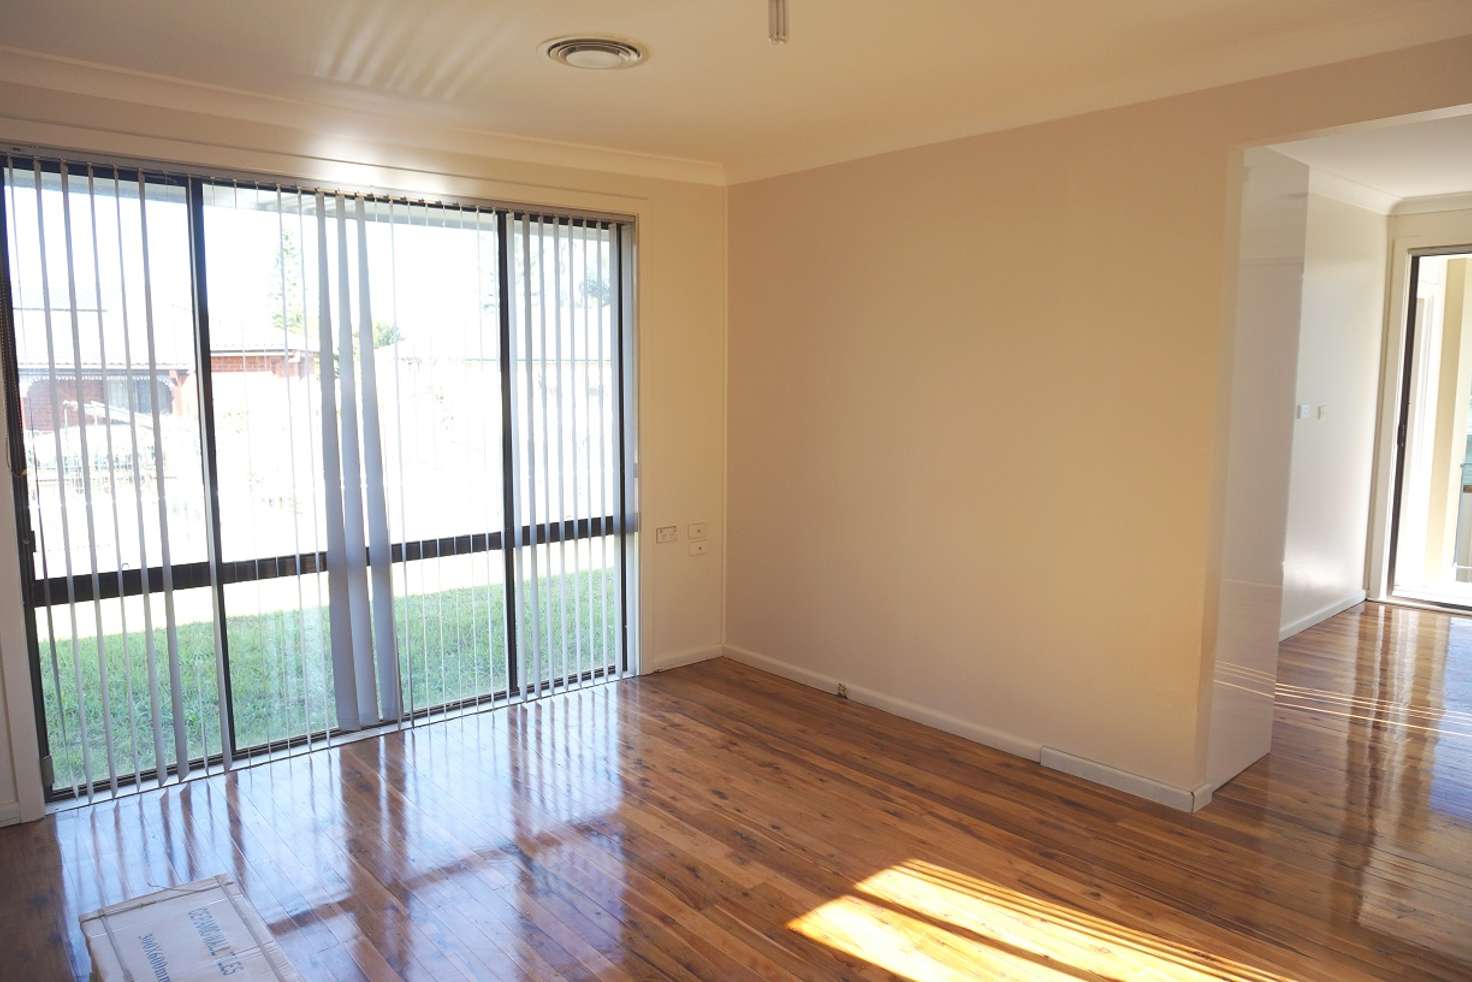 Main view of Homely house listing, 166 Carlisle Ave, Blackett NSW 2770